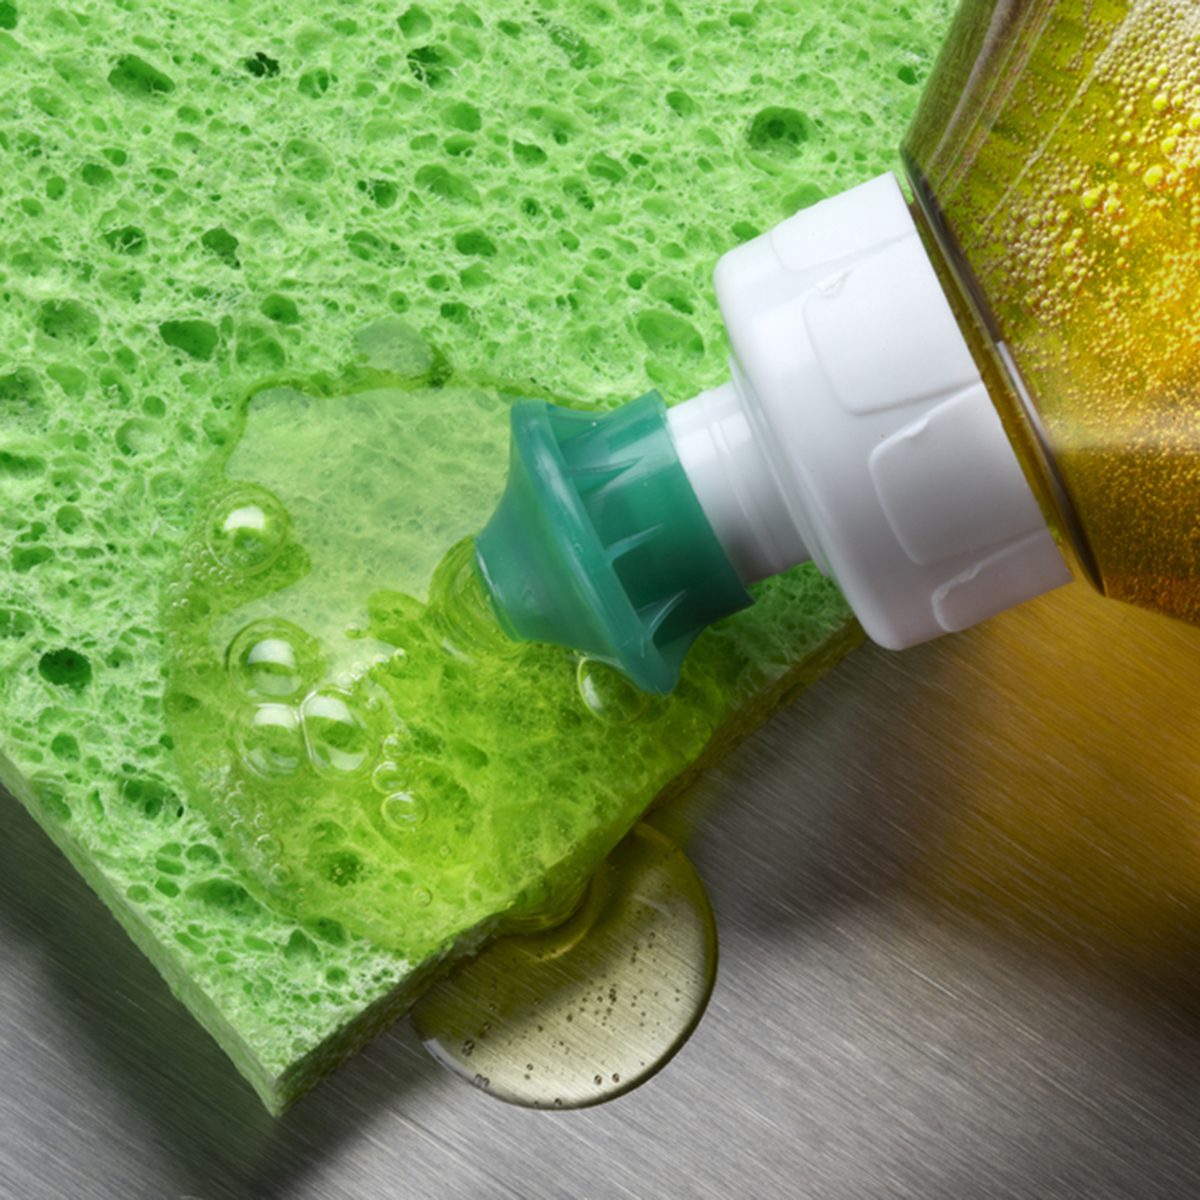 macro shot of dish soap being squeezed onto green sponge in aluminum sink; Shutterstock ID 57254341; Job (TFH, TOH, RD, BNB, CWM, CM): TOH